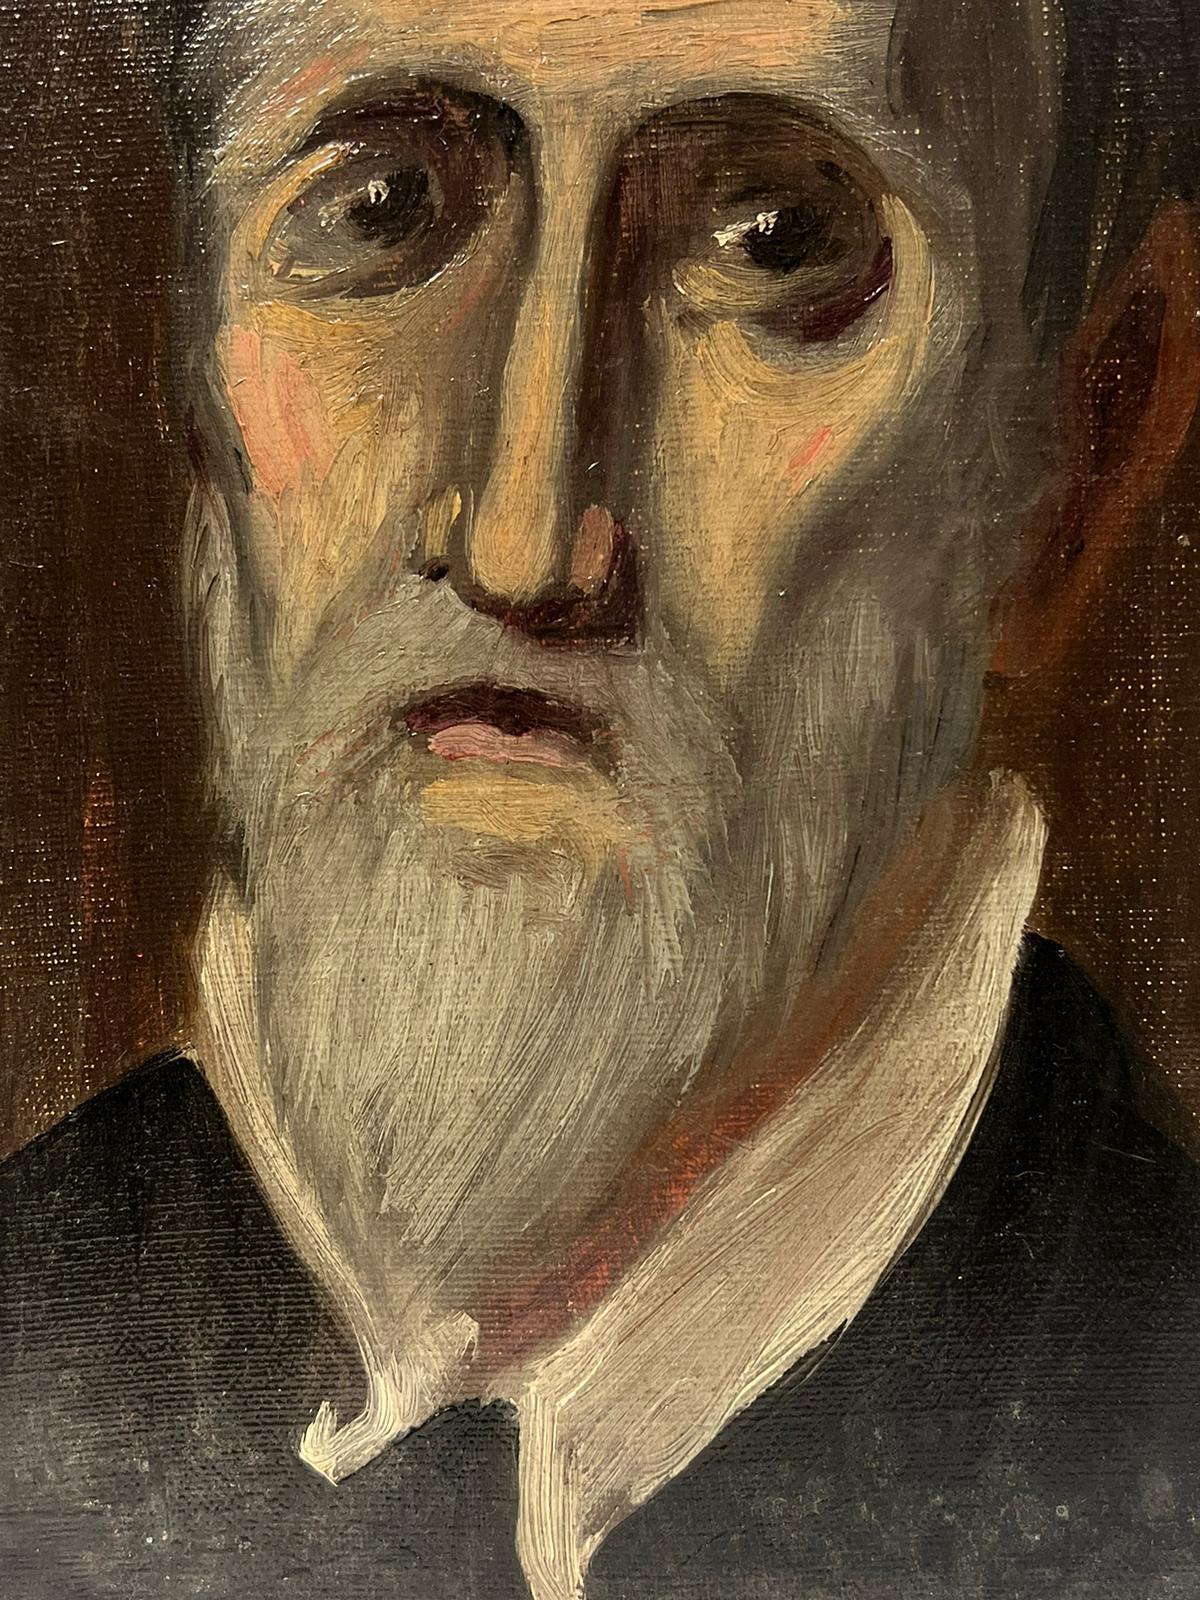 Portrait of a Man
French School, mid 20th century
inscribed verso
oil painting on canvas, unframed
painting: 11 x 7.5 inches
condition: overall very good